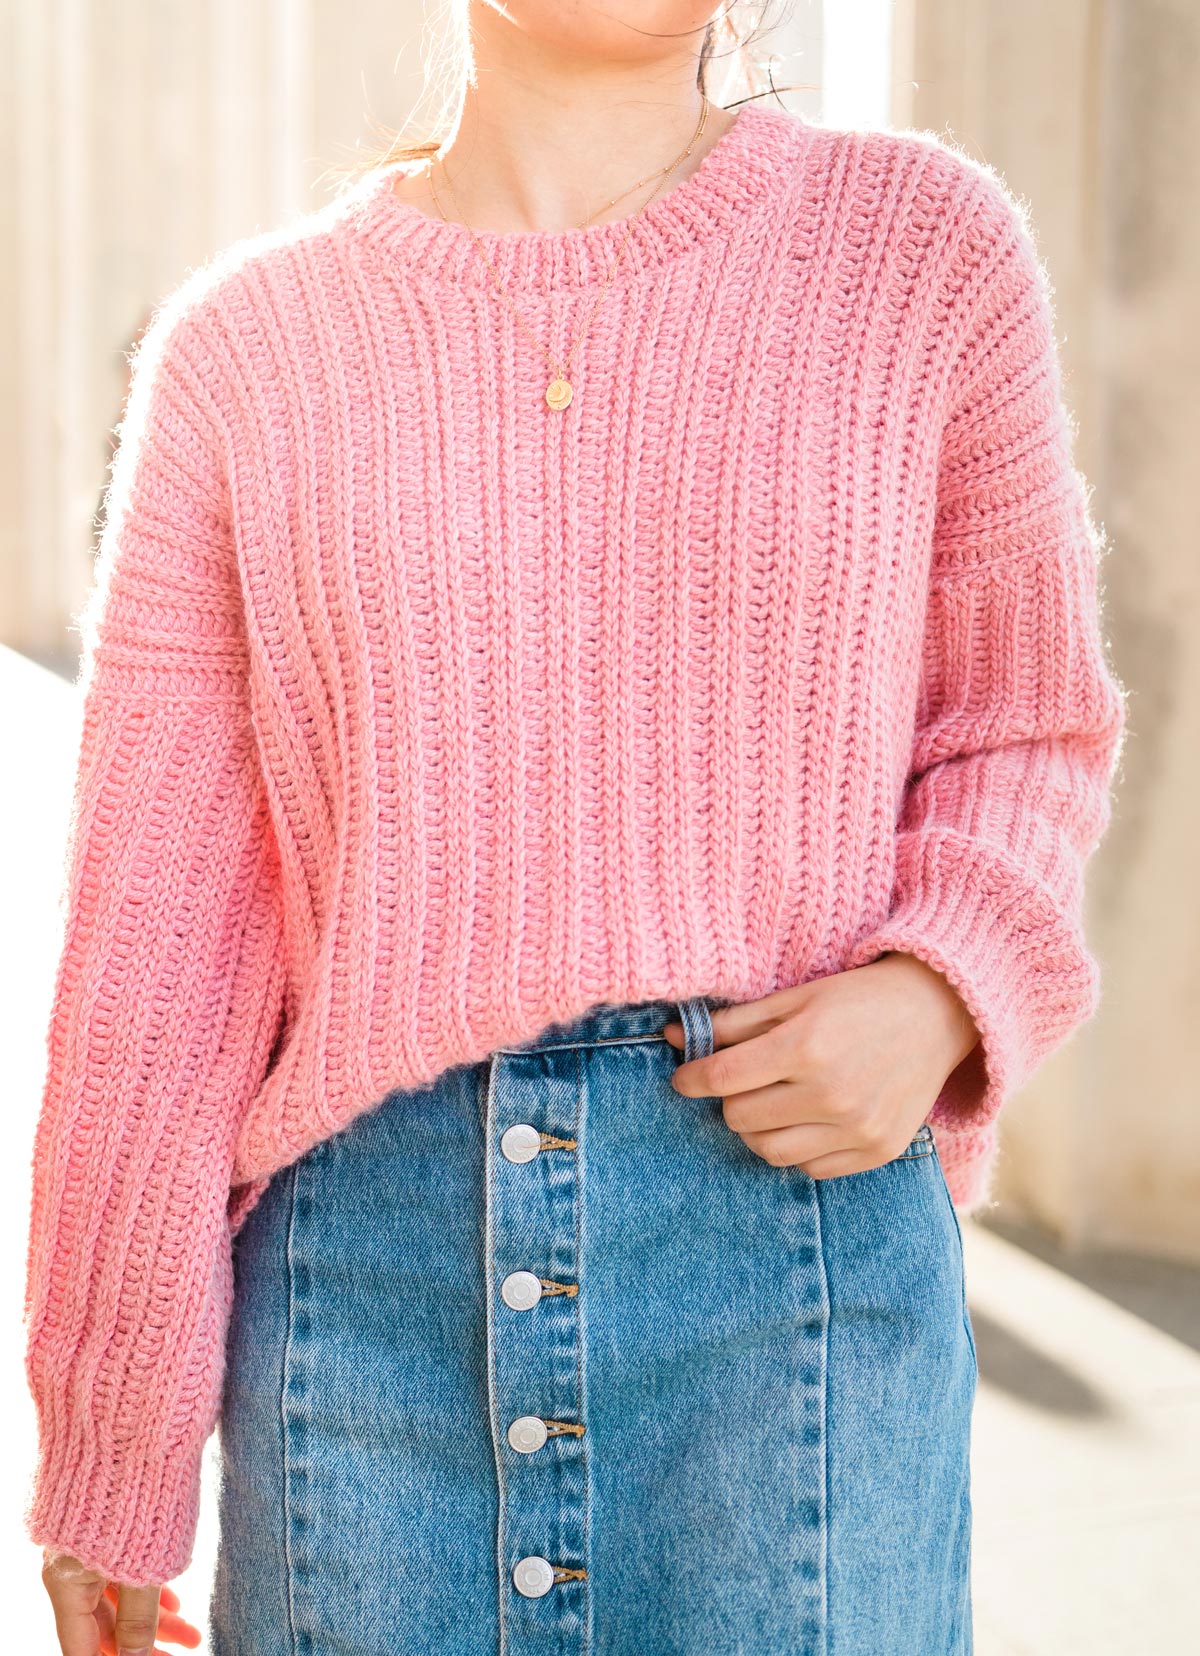 Knit-Look Ribbed Crochet Sweater - Free Pattern | For The Frills